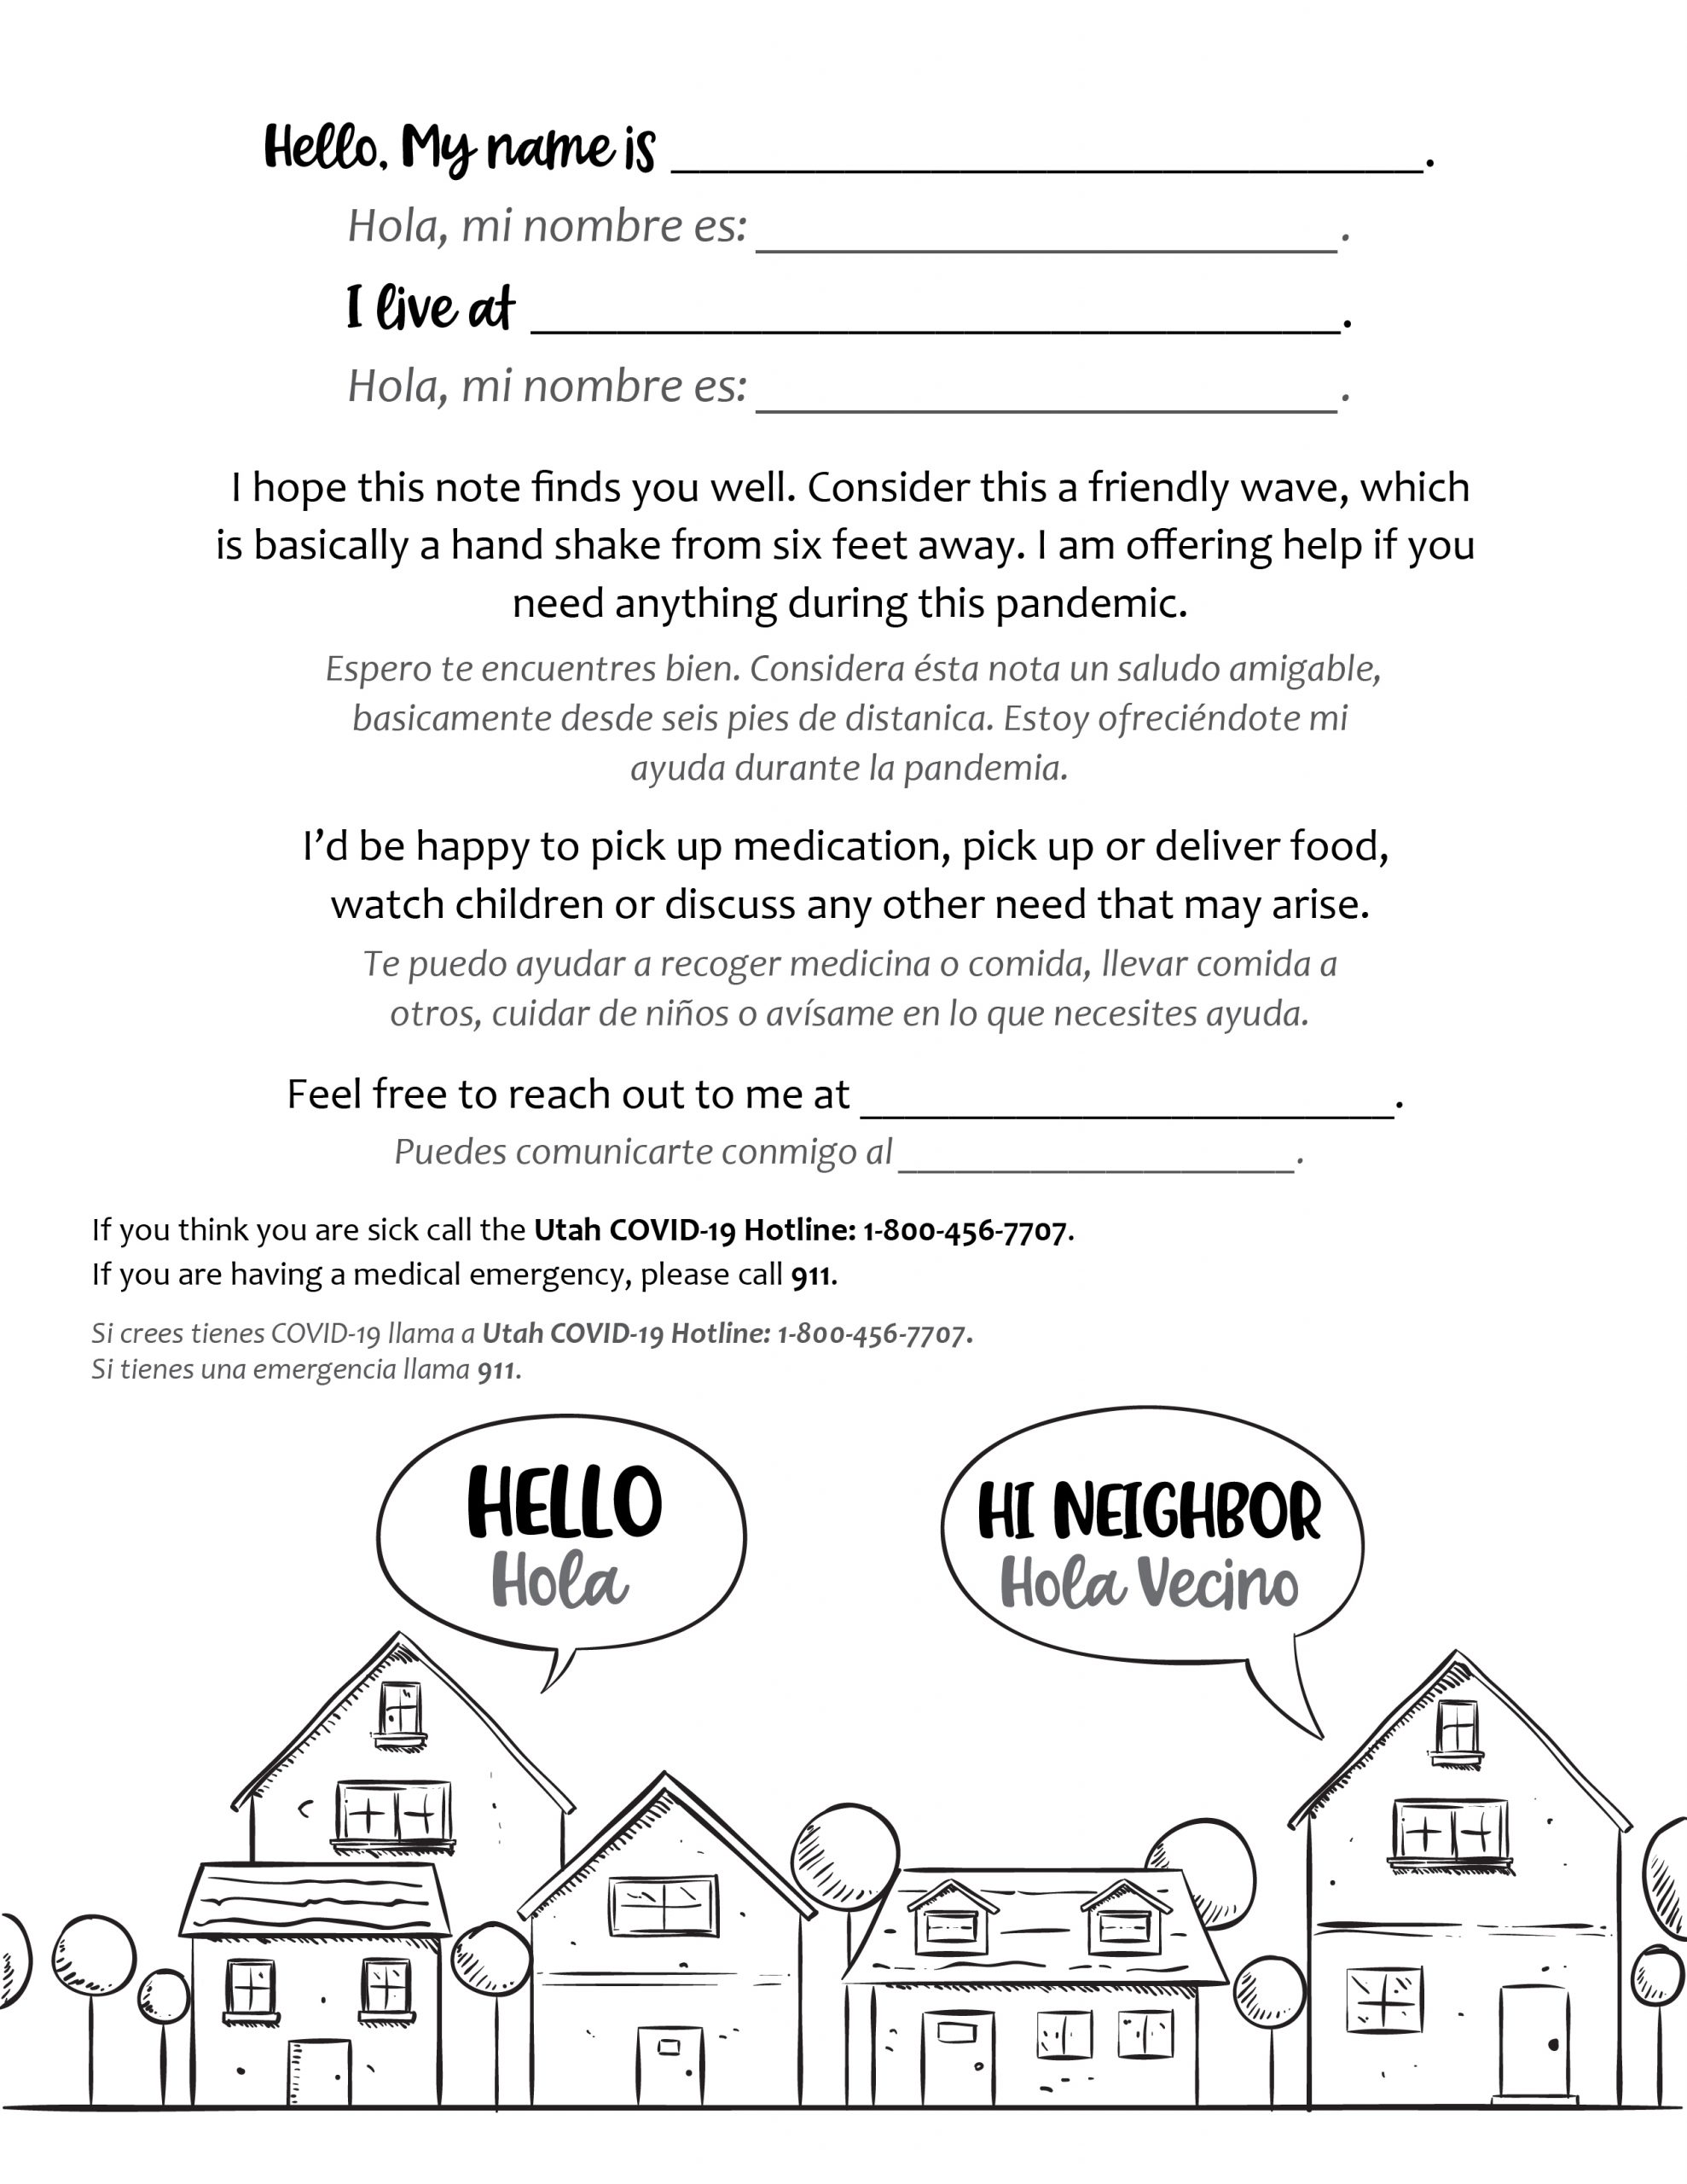 A black and white form for neighbors to fill name and address to offer assistance.